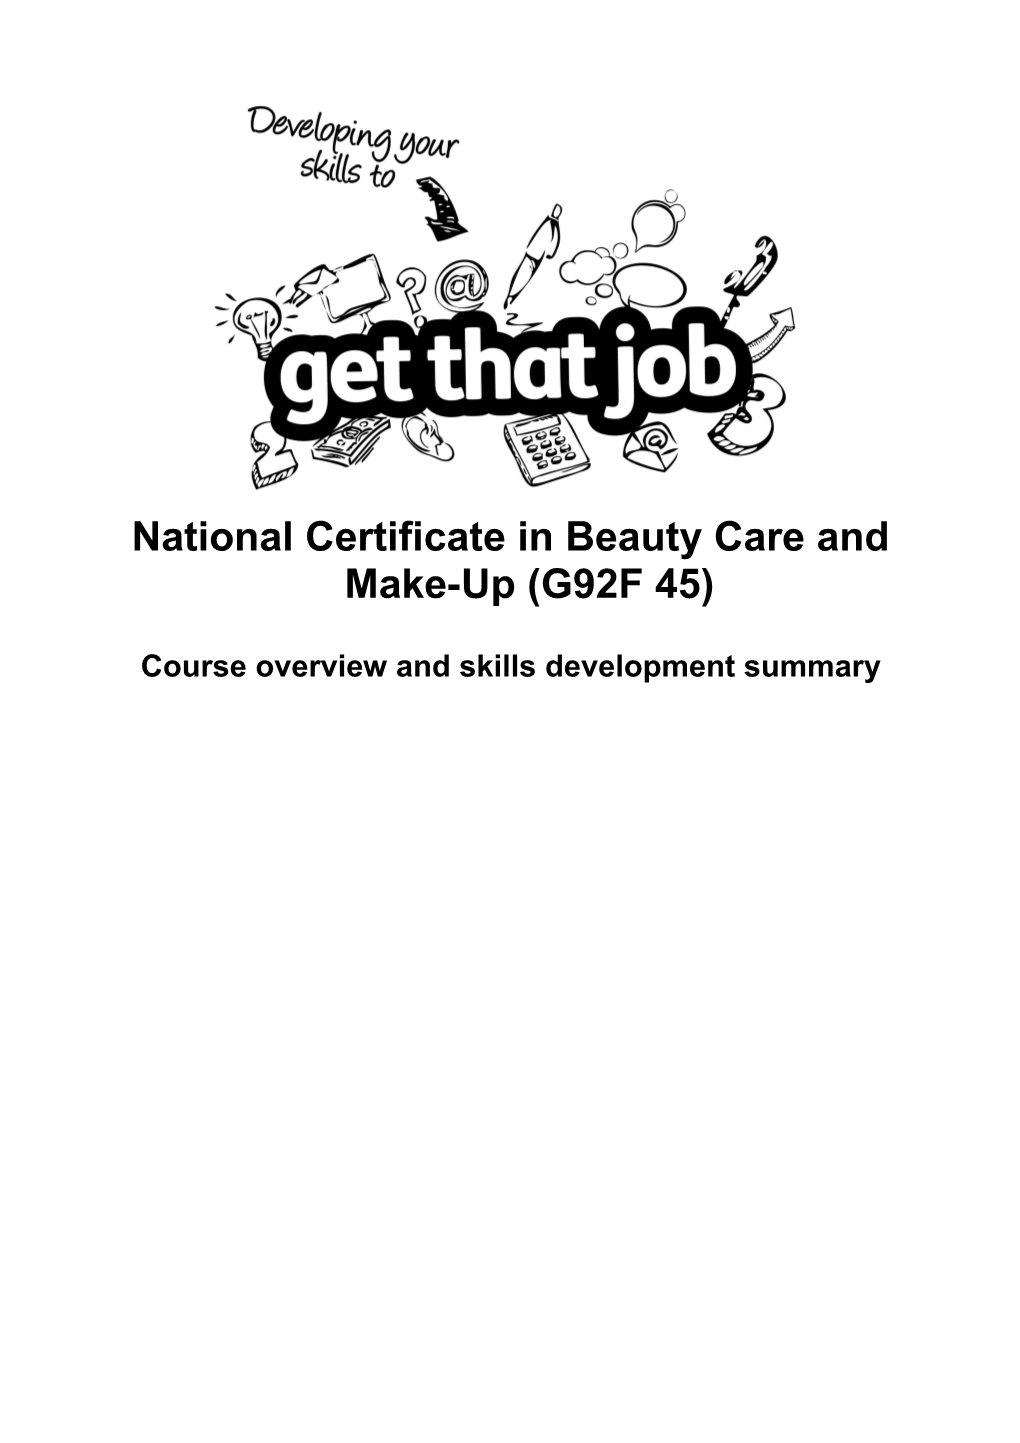 National Certificate in Beauty Careand Make-Up (G92F 45)